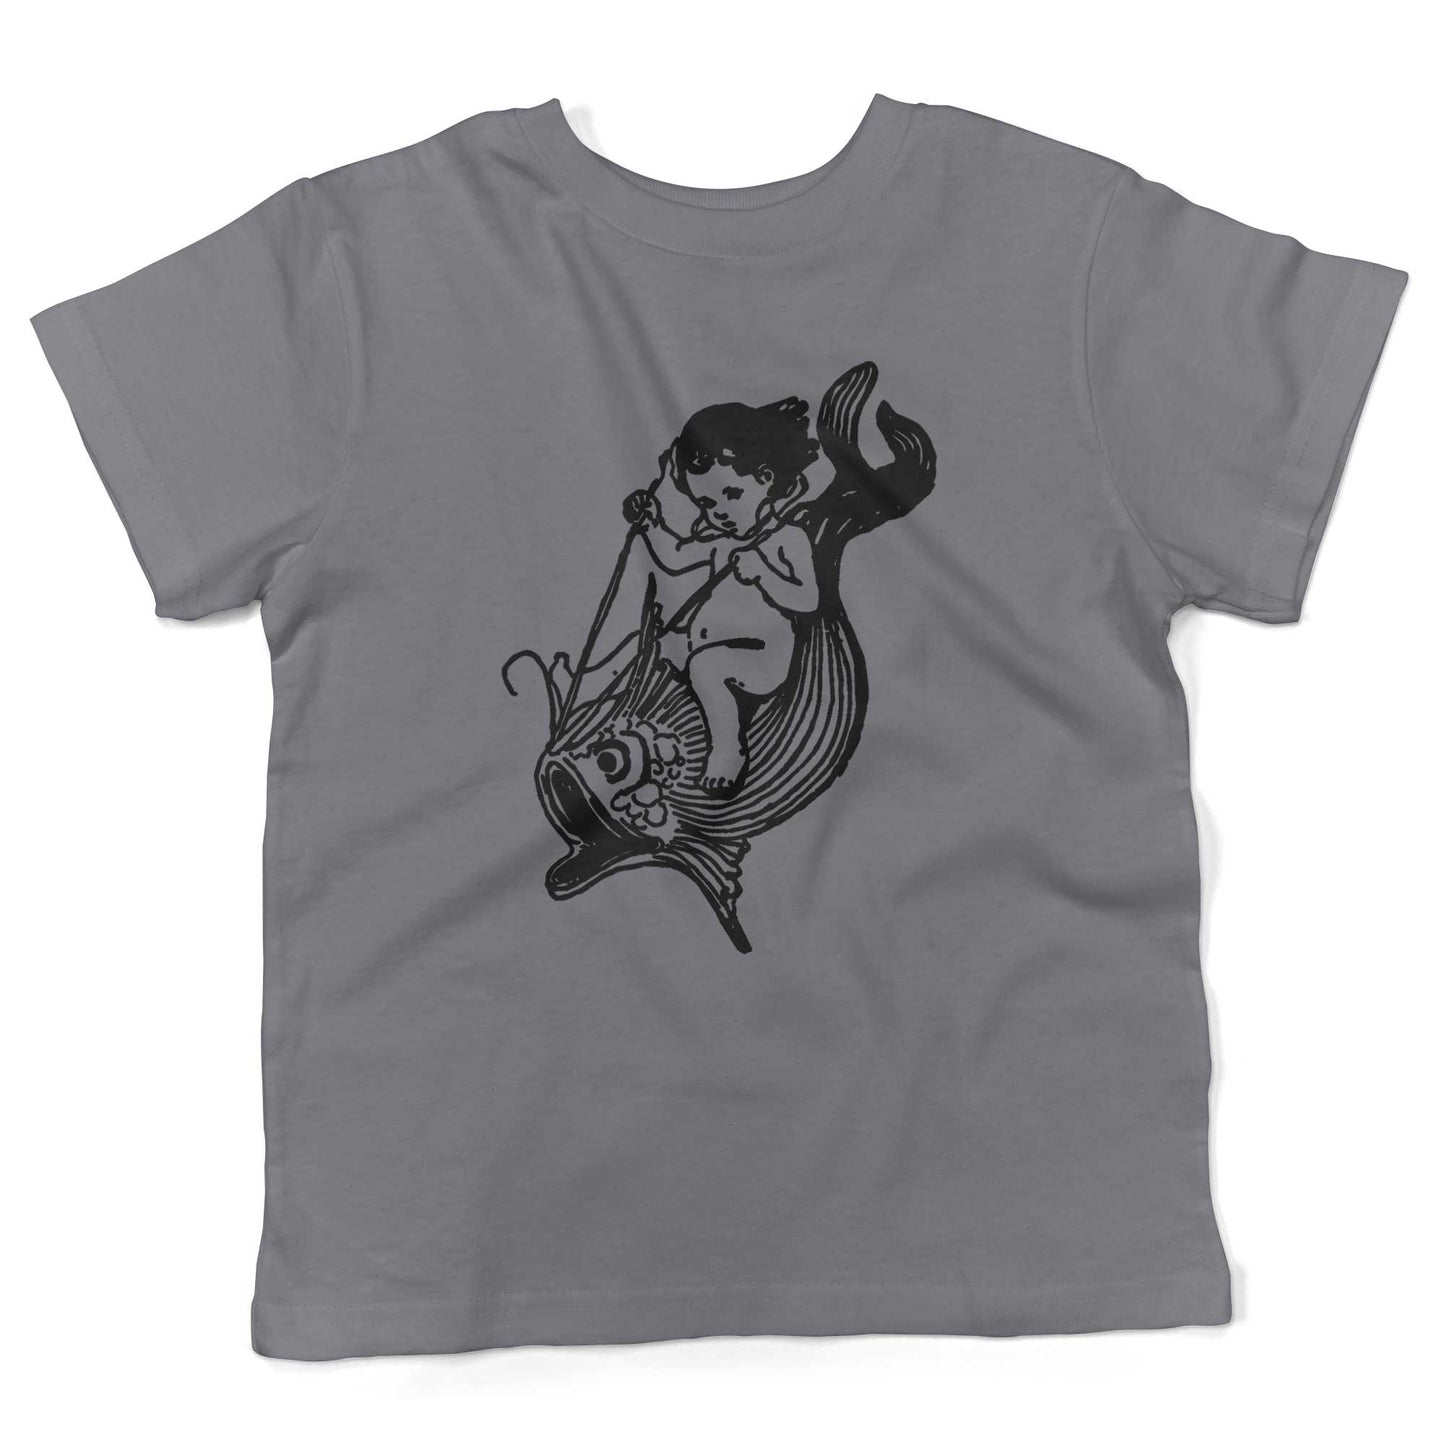 Water Baby Riding A Giant Fish Toddler Shirt-Slate-2T